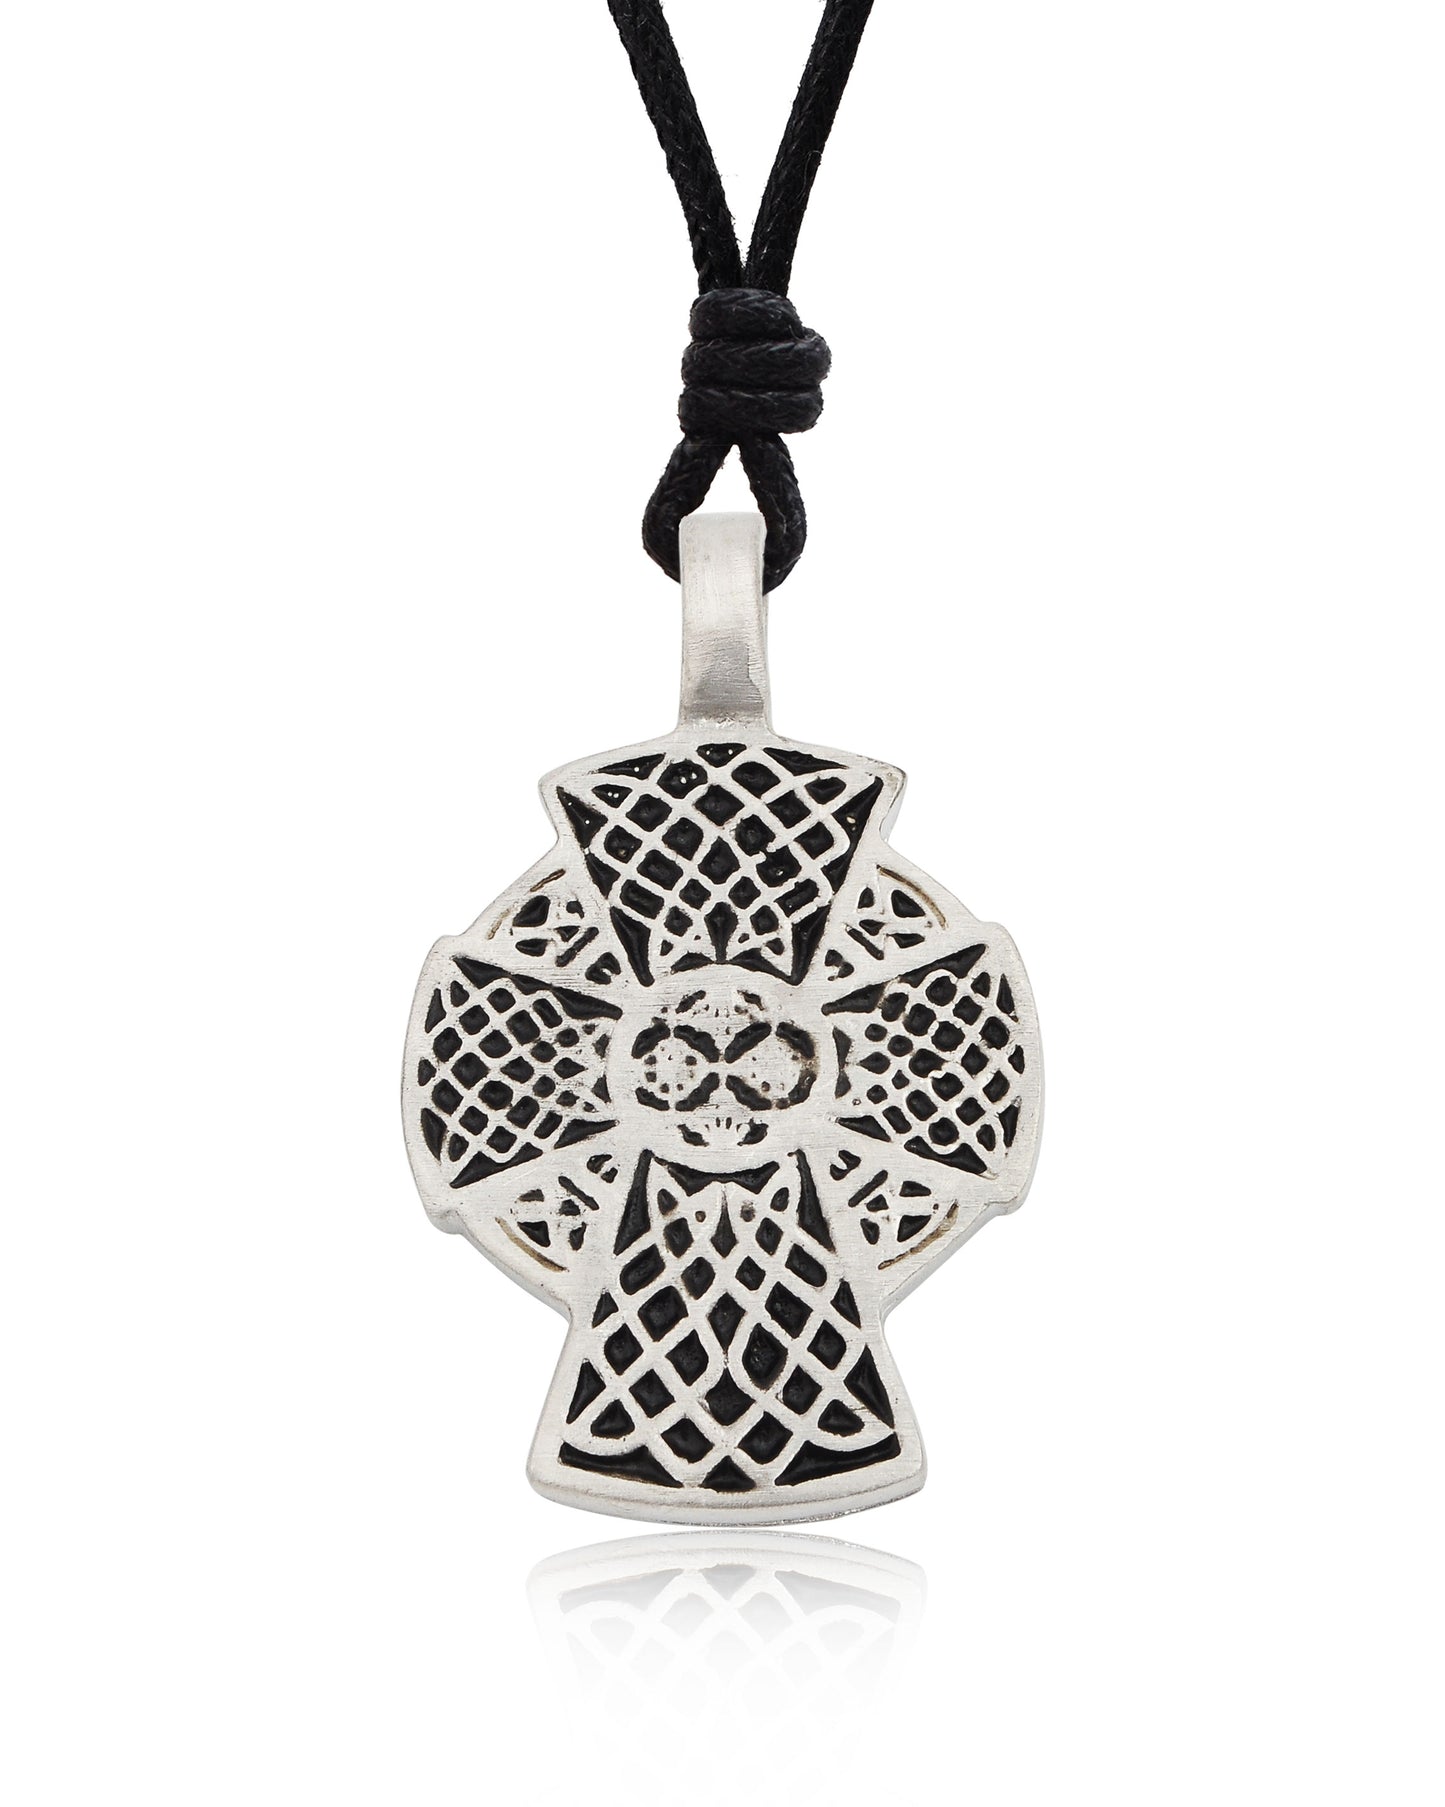 Stunning Celtic Cross Silver Pewter Charm Necklace Pendant Jewelry